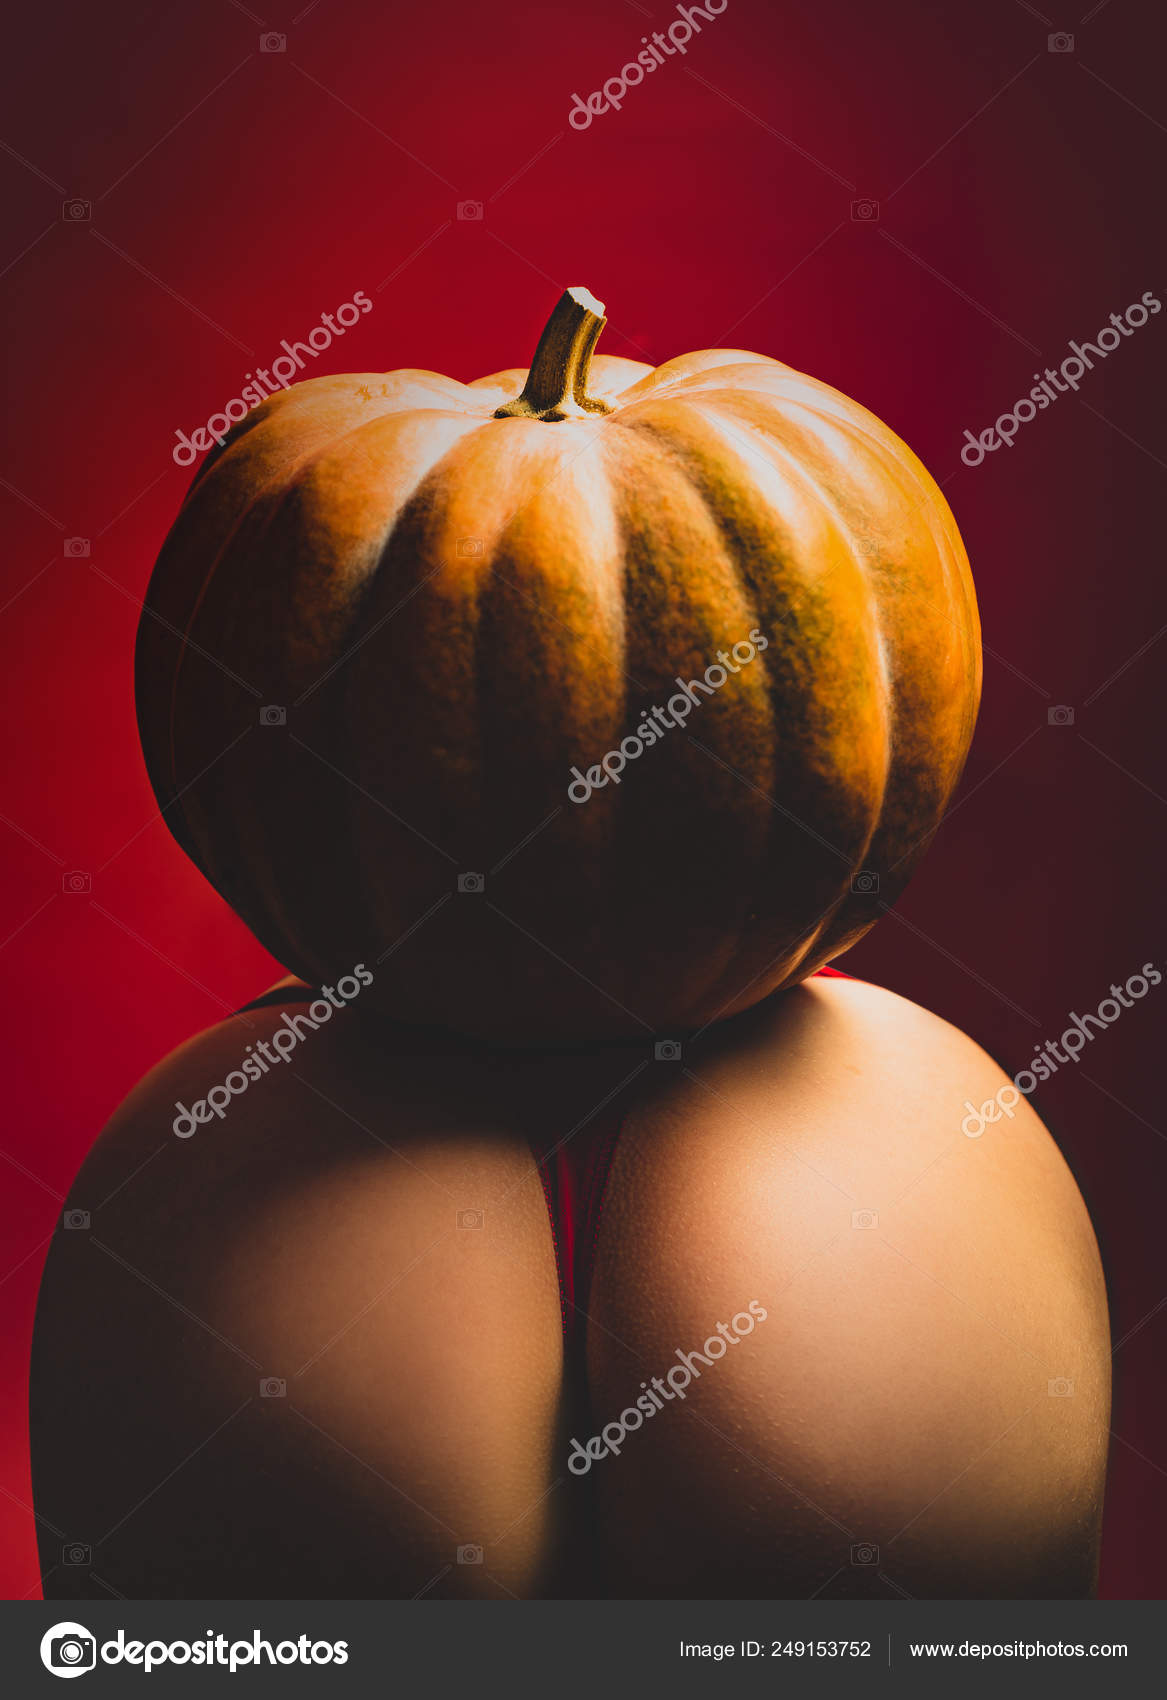 Pumpkins on big ass. Female sensual ass posing with red panties and pumpkin. Halloween festival decorations. Sex costume for celebrates Halloween photo